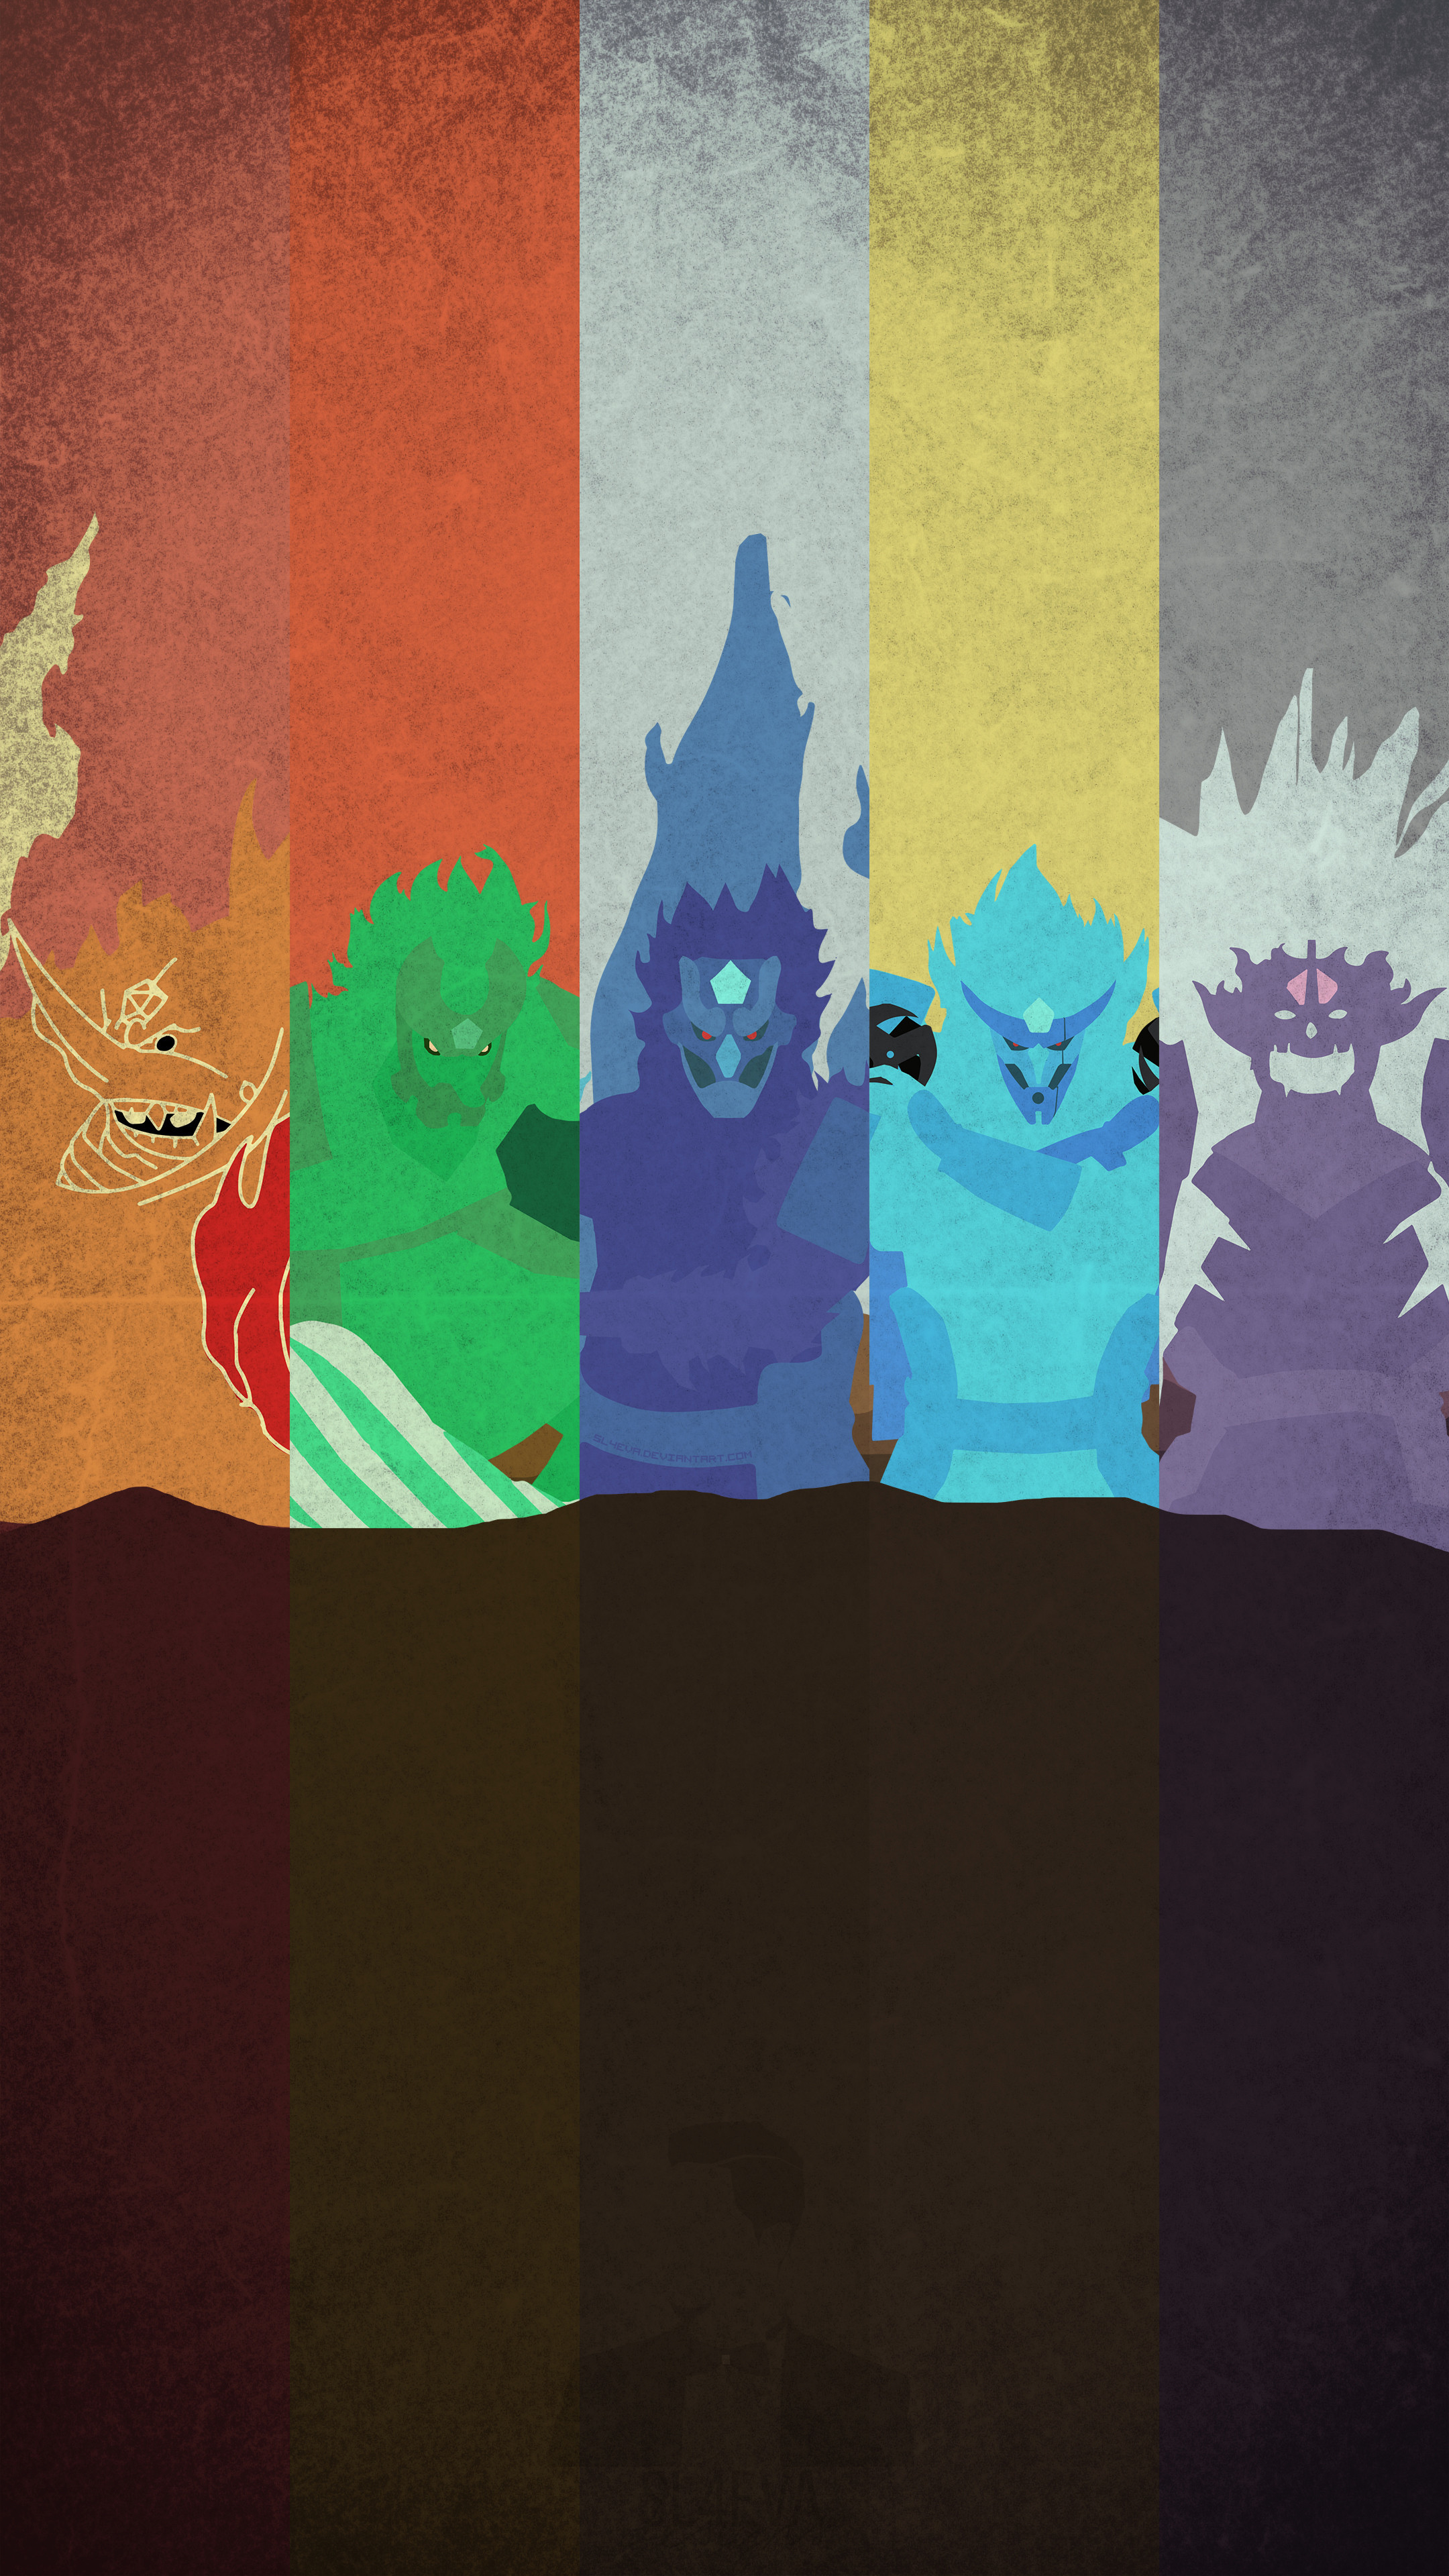 2160x3840 This is more an experiment than a real wallpaper. I wanted to combine the 5  Susanoo into one unique wallpaper and this is the result. Feedback?